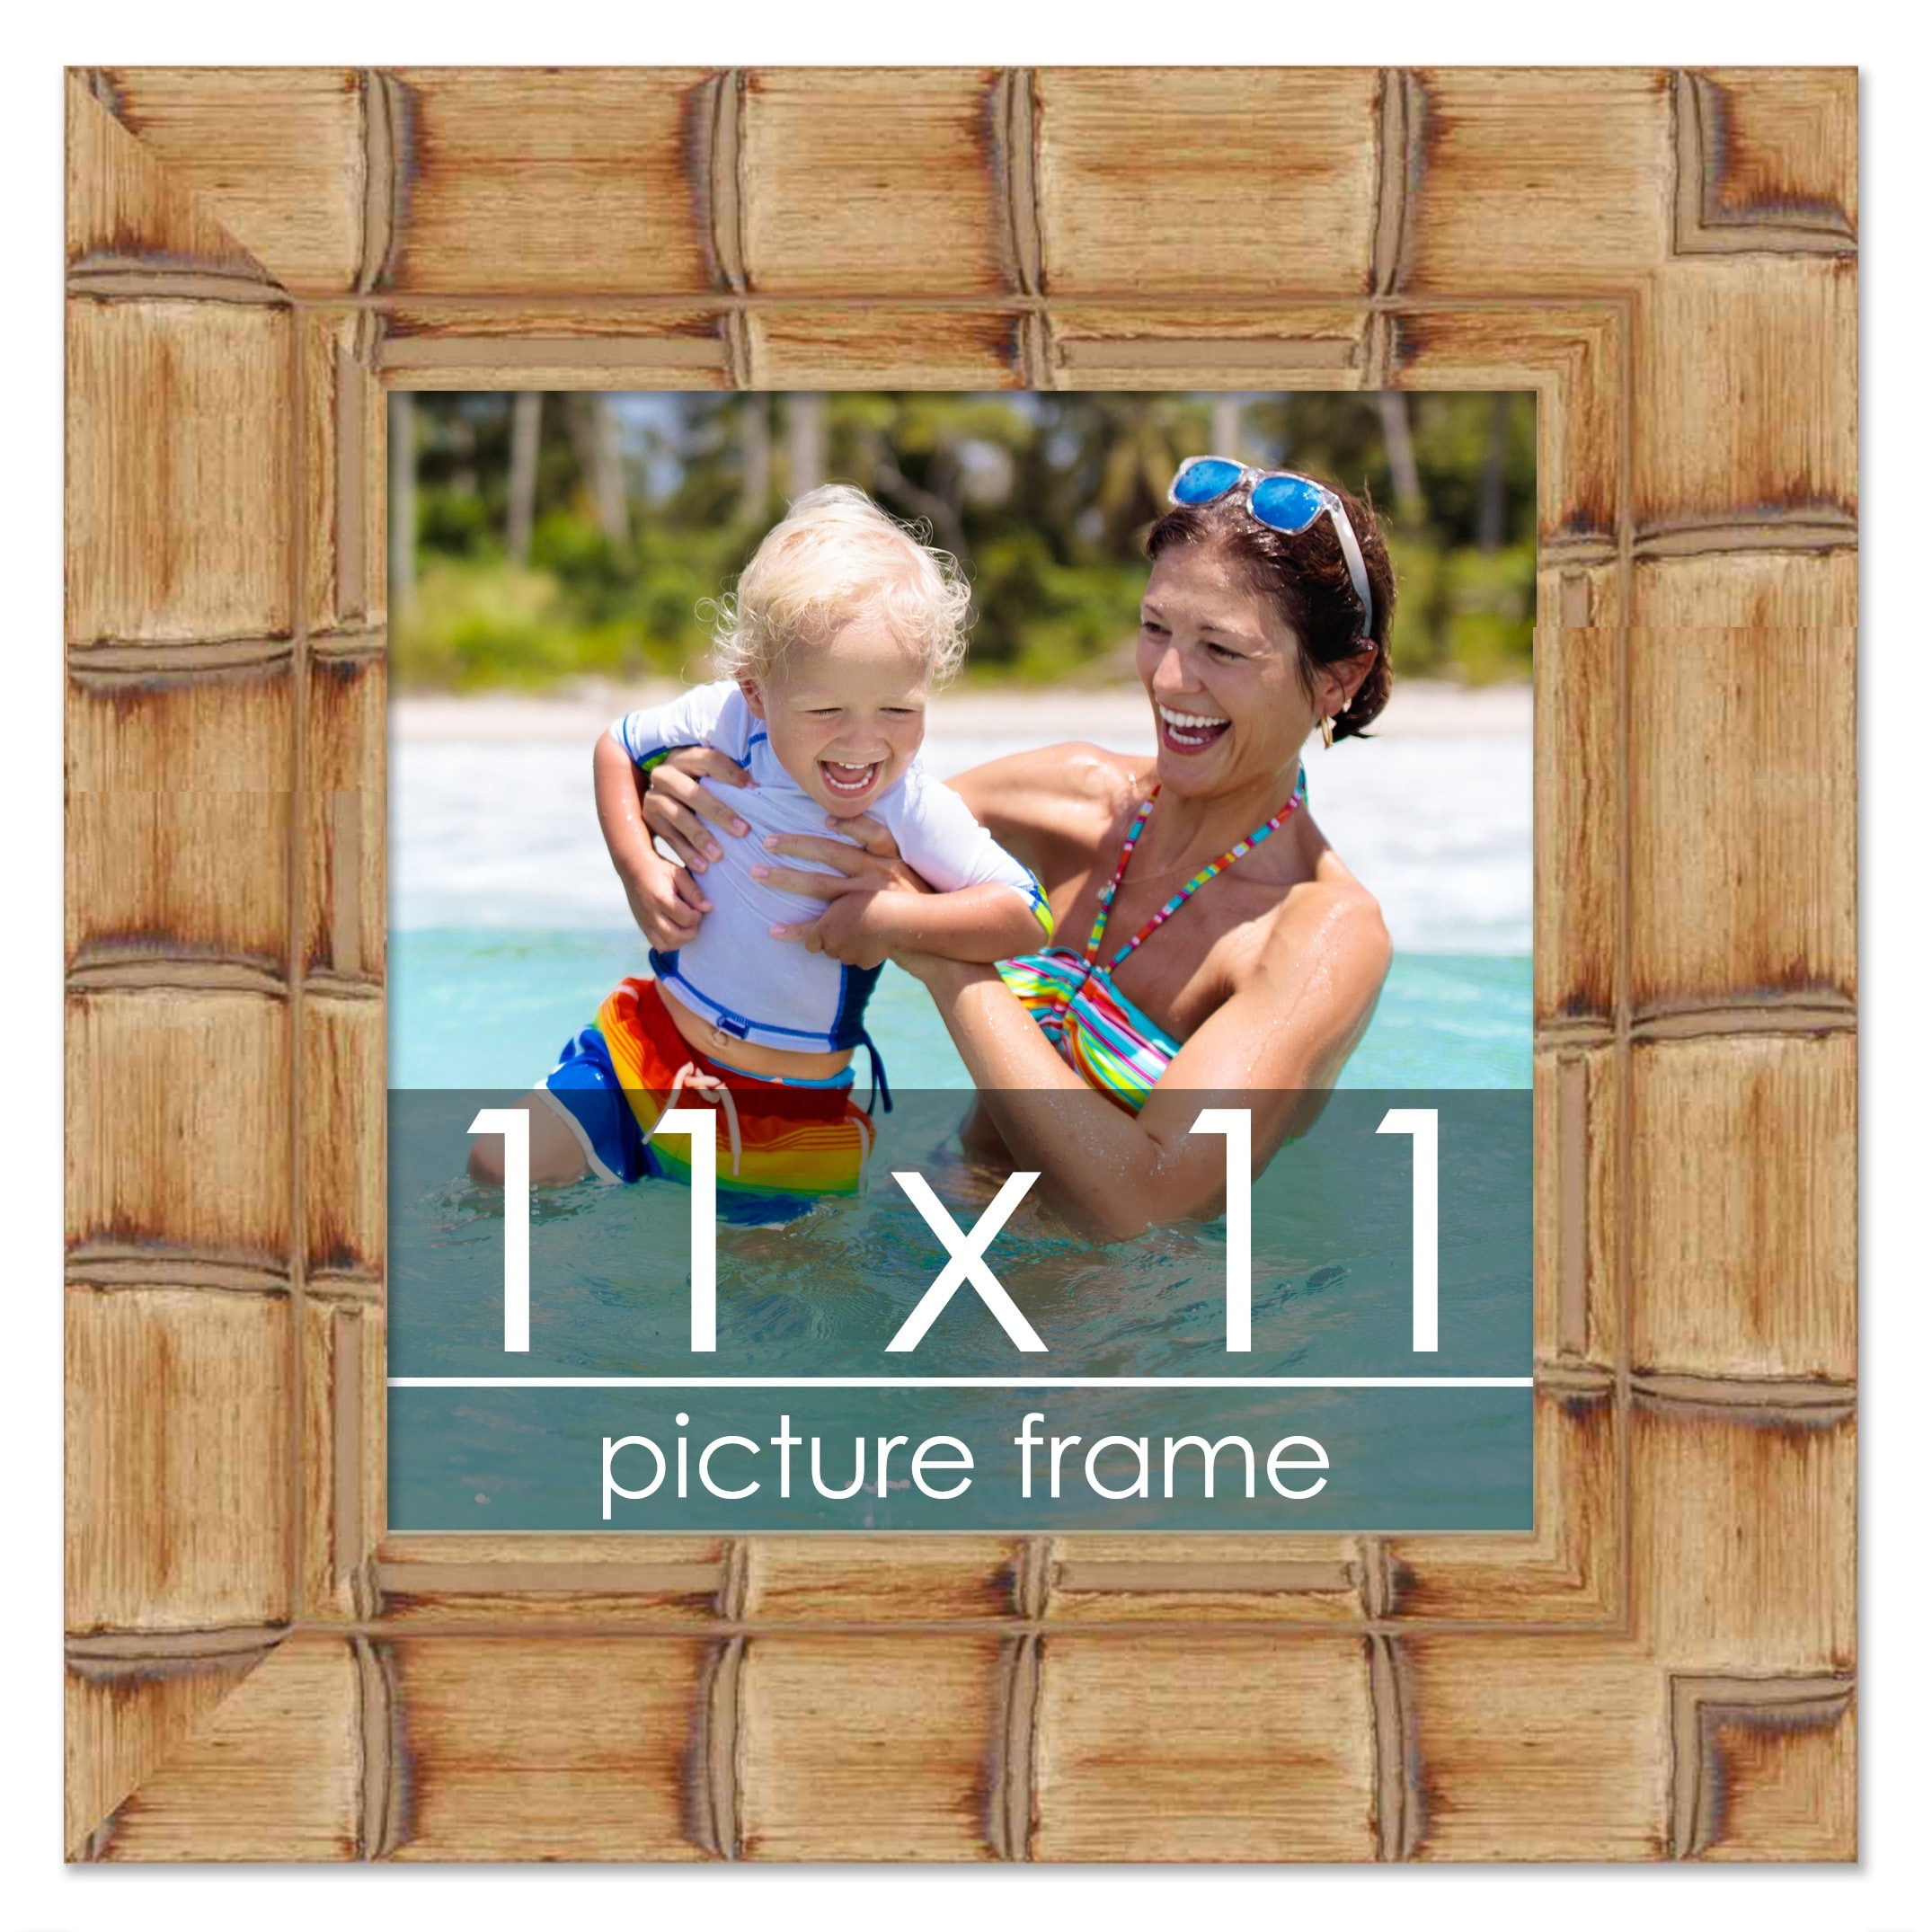 PosterPalooza 8x8 Frame with Mat - Black 11x11 Frame Wood